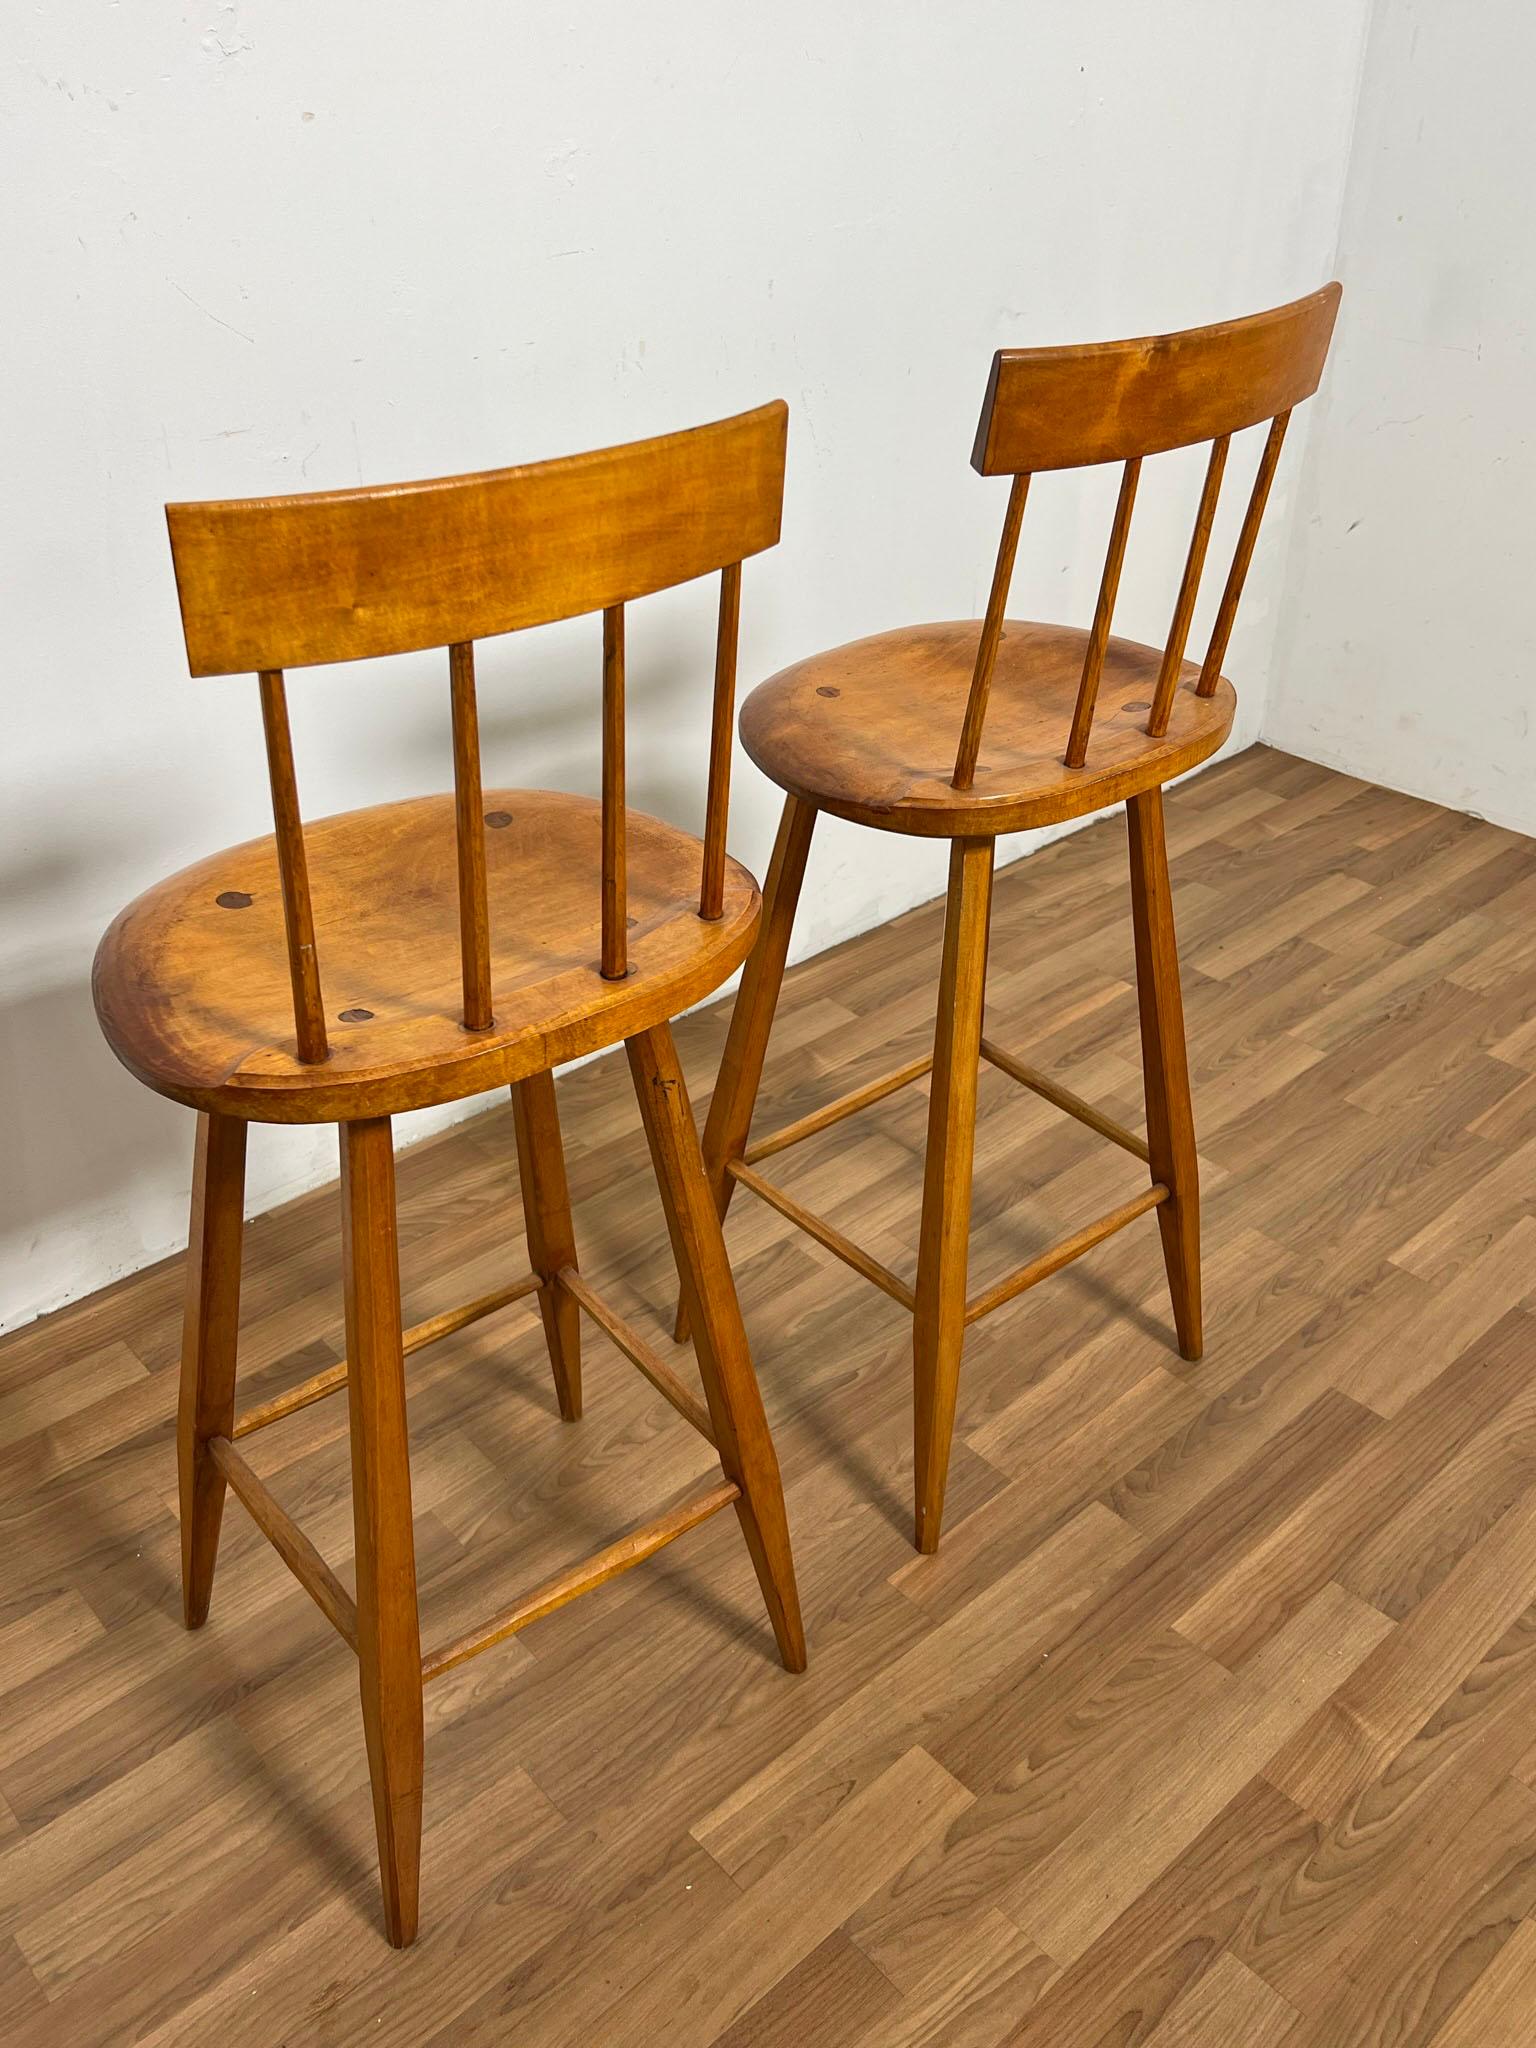 Pair of Hand Made Studio Craft Bar Stools by Bill Woodhead, D. 1985 For Sale 4